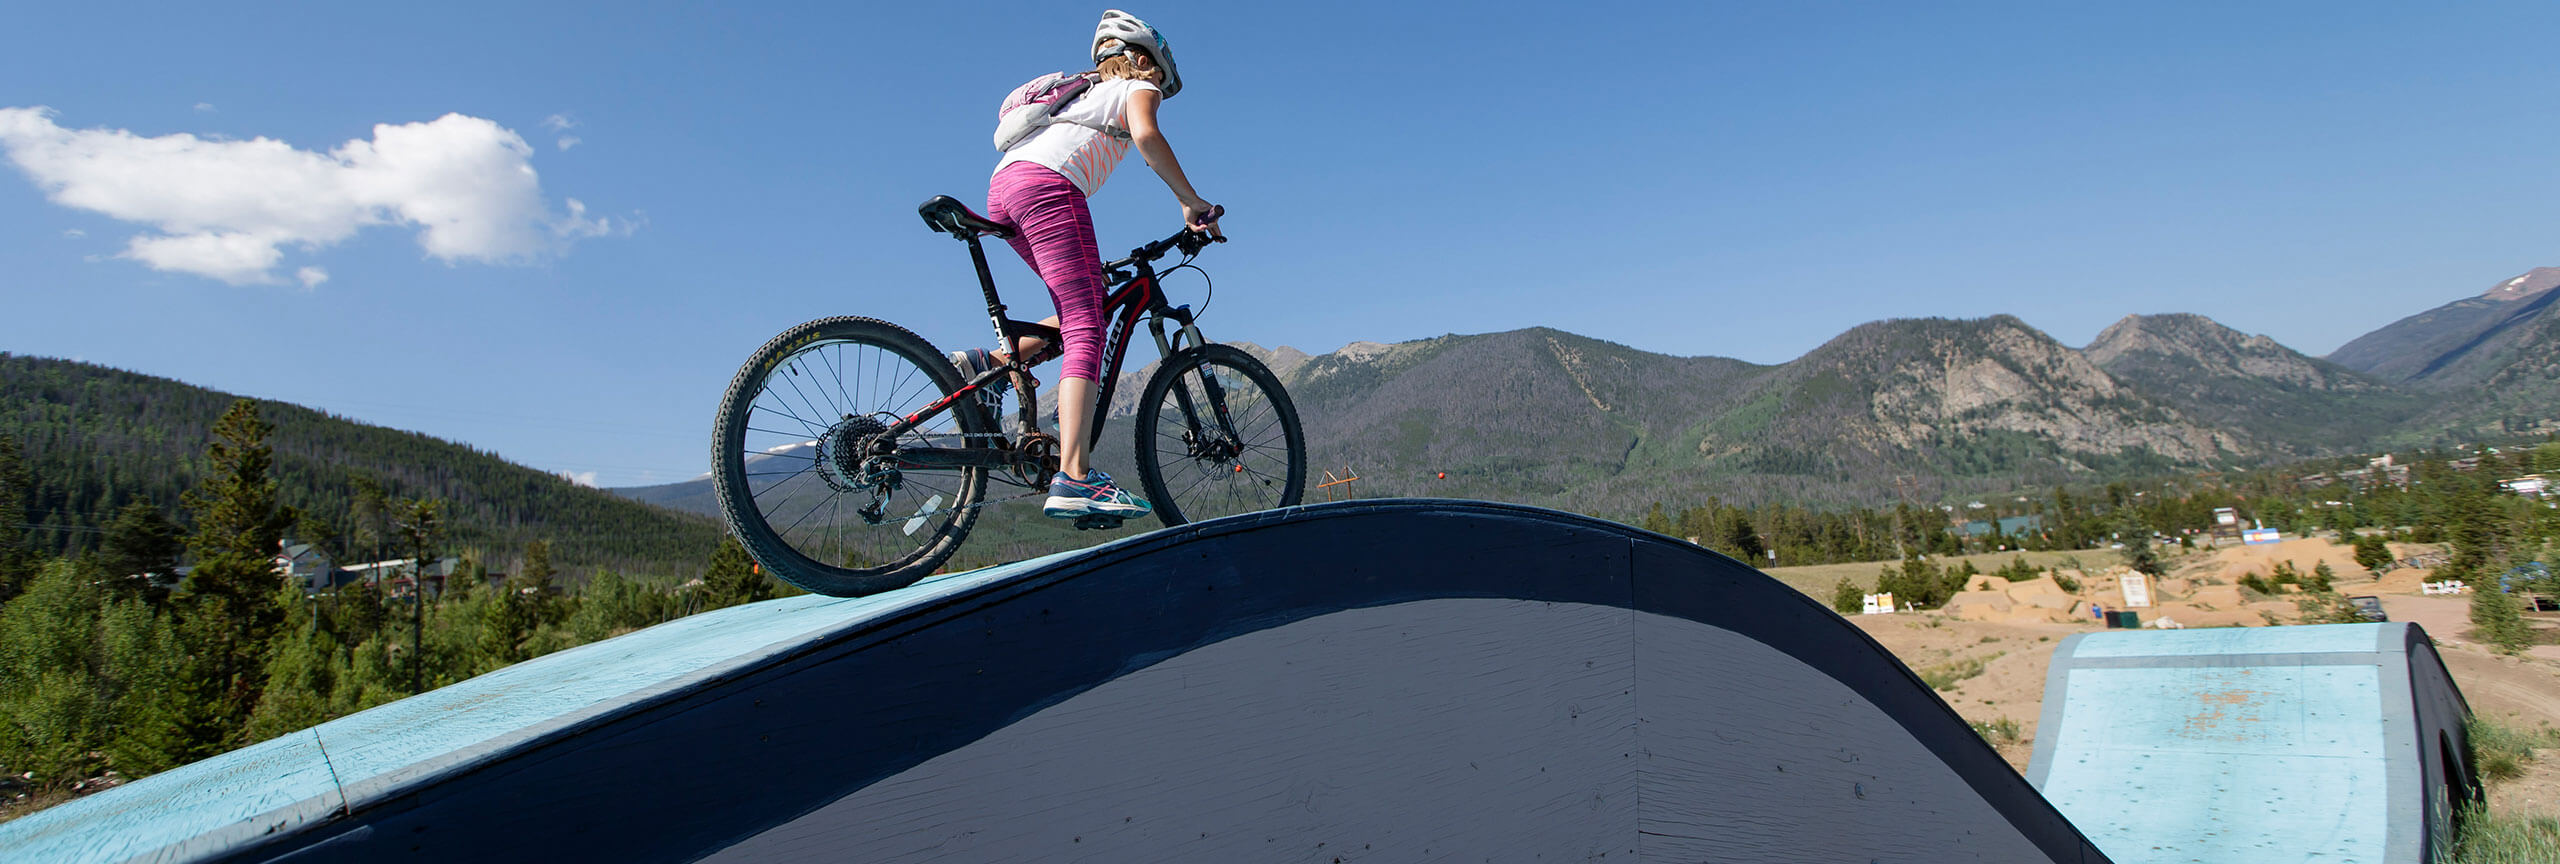 Girl on bike on rolling feature at the Frisco Bike Park